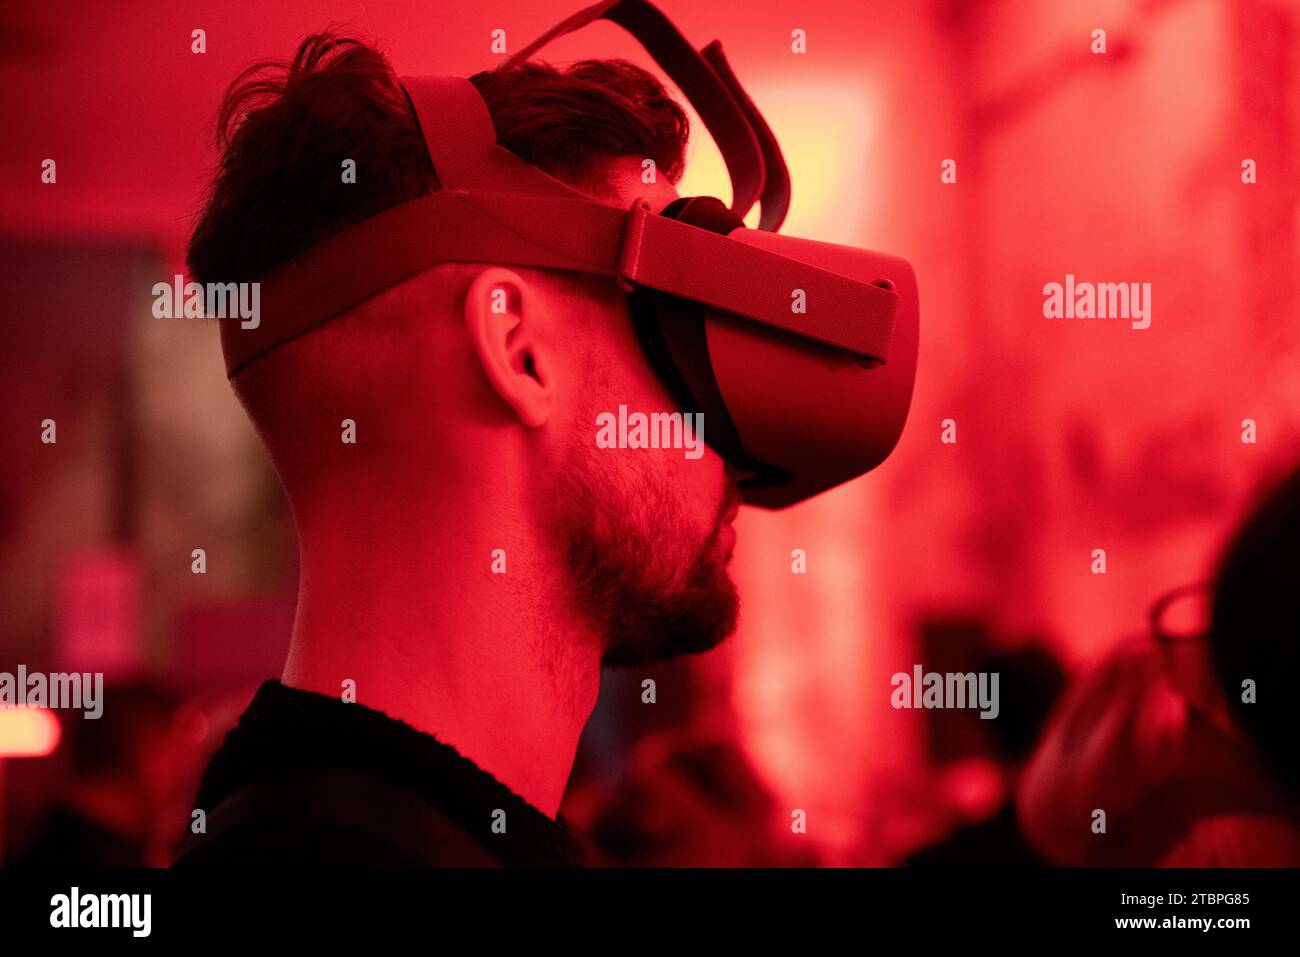 In the crimson glow, a man profiles his virtual journey, navigating unseen realms through VR glasses at a cutting-edge tech event. Stock Photo